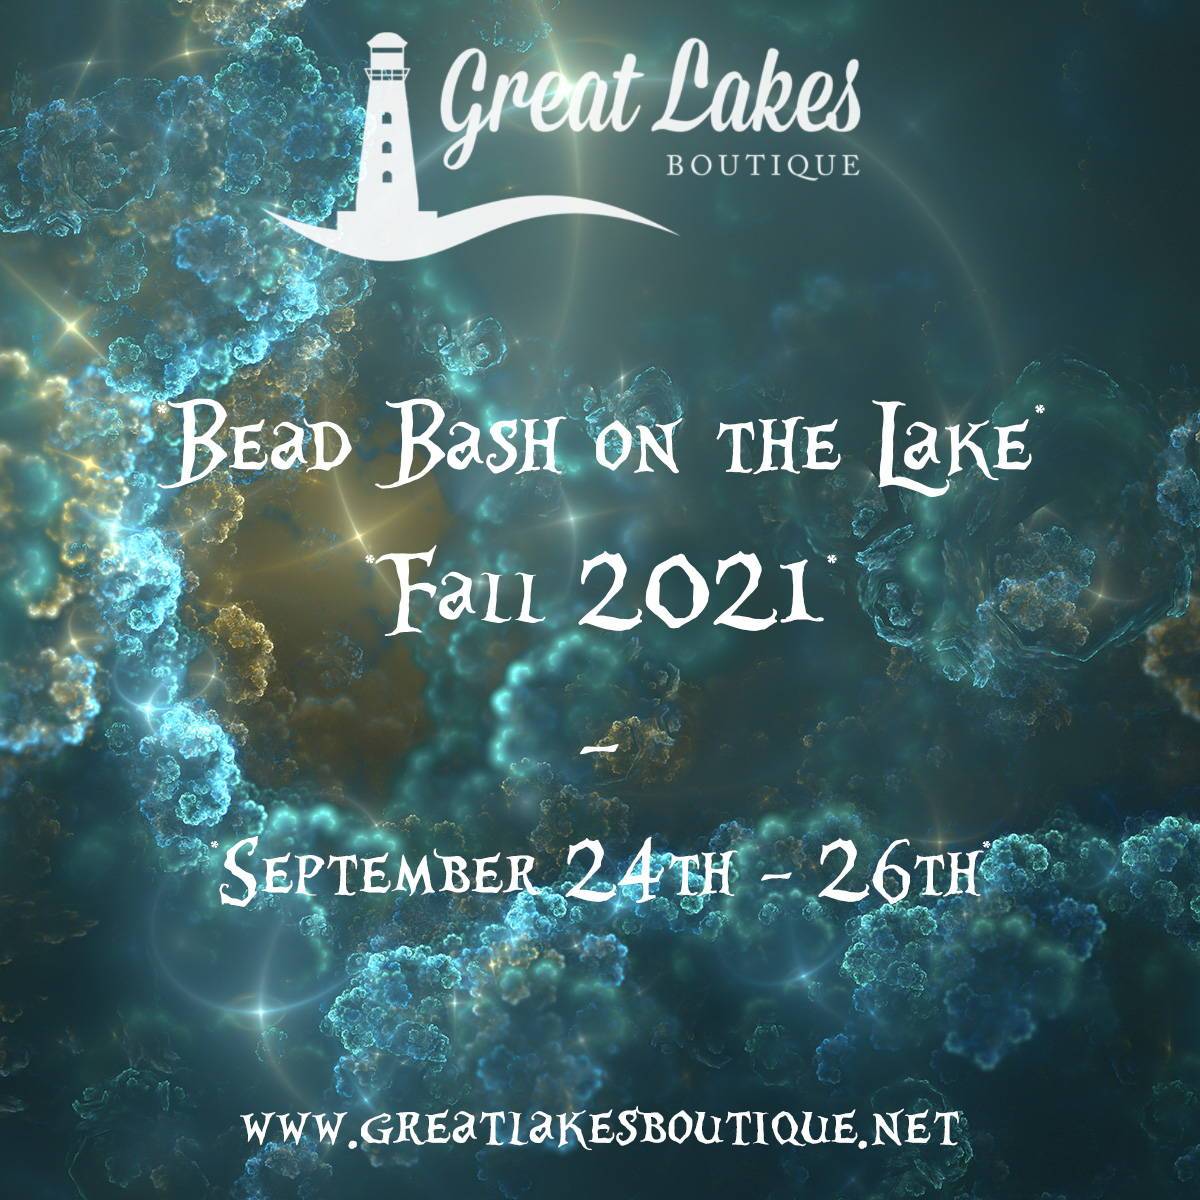 Great Lakes Boutique Bead Bash on the Lake Fall 2021 Online Event